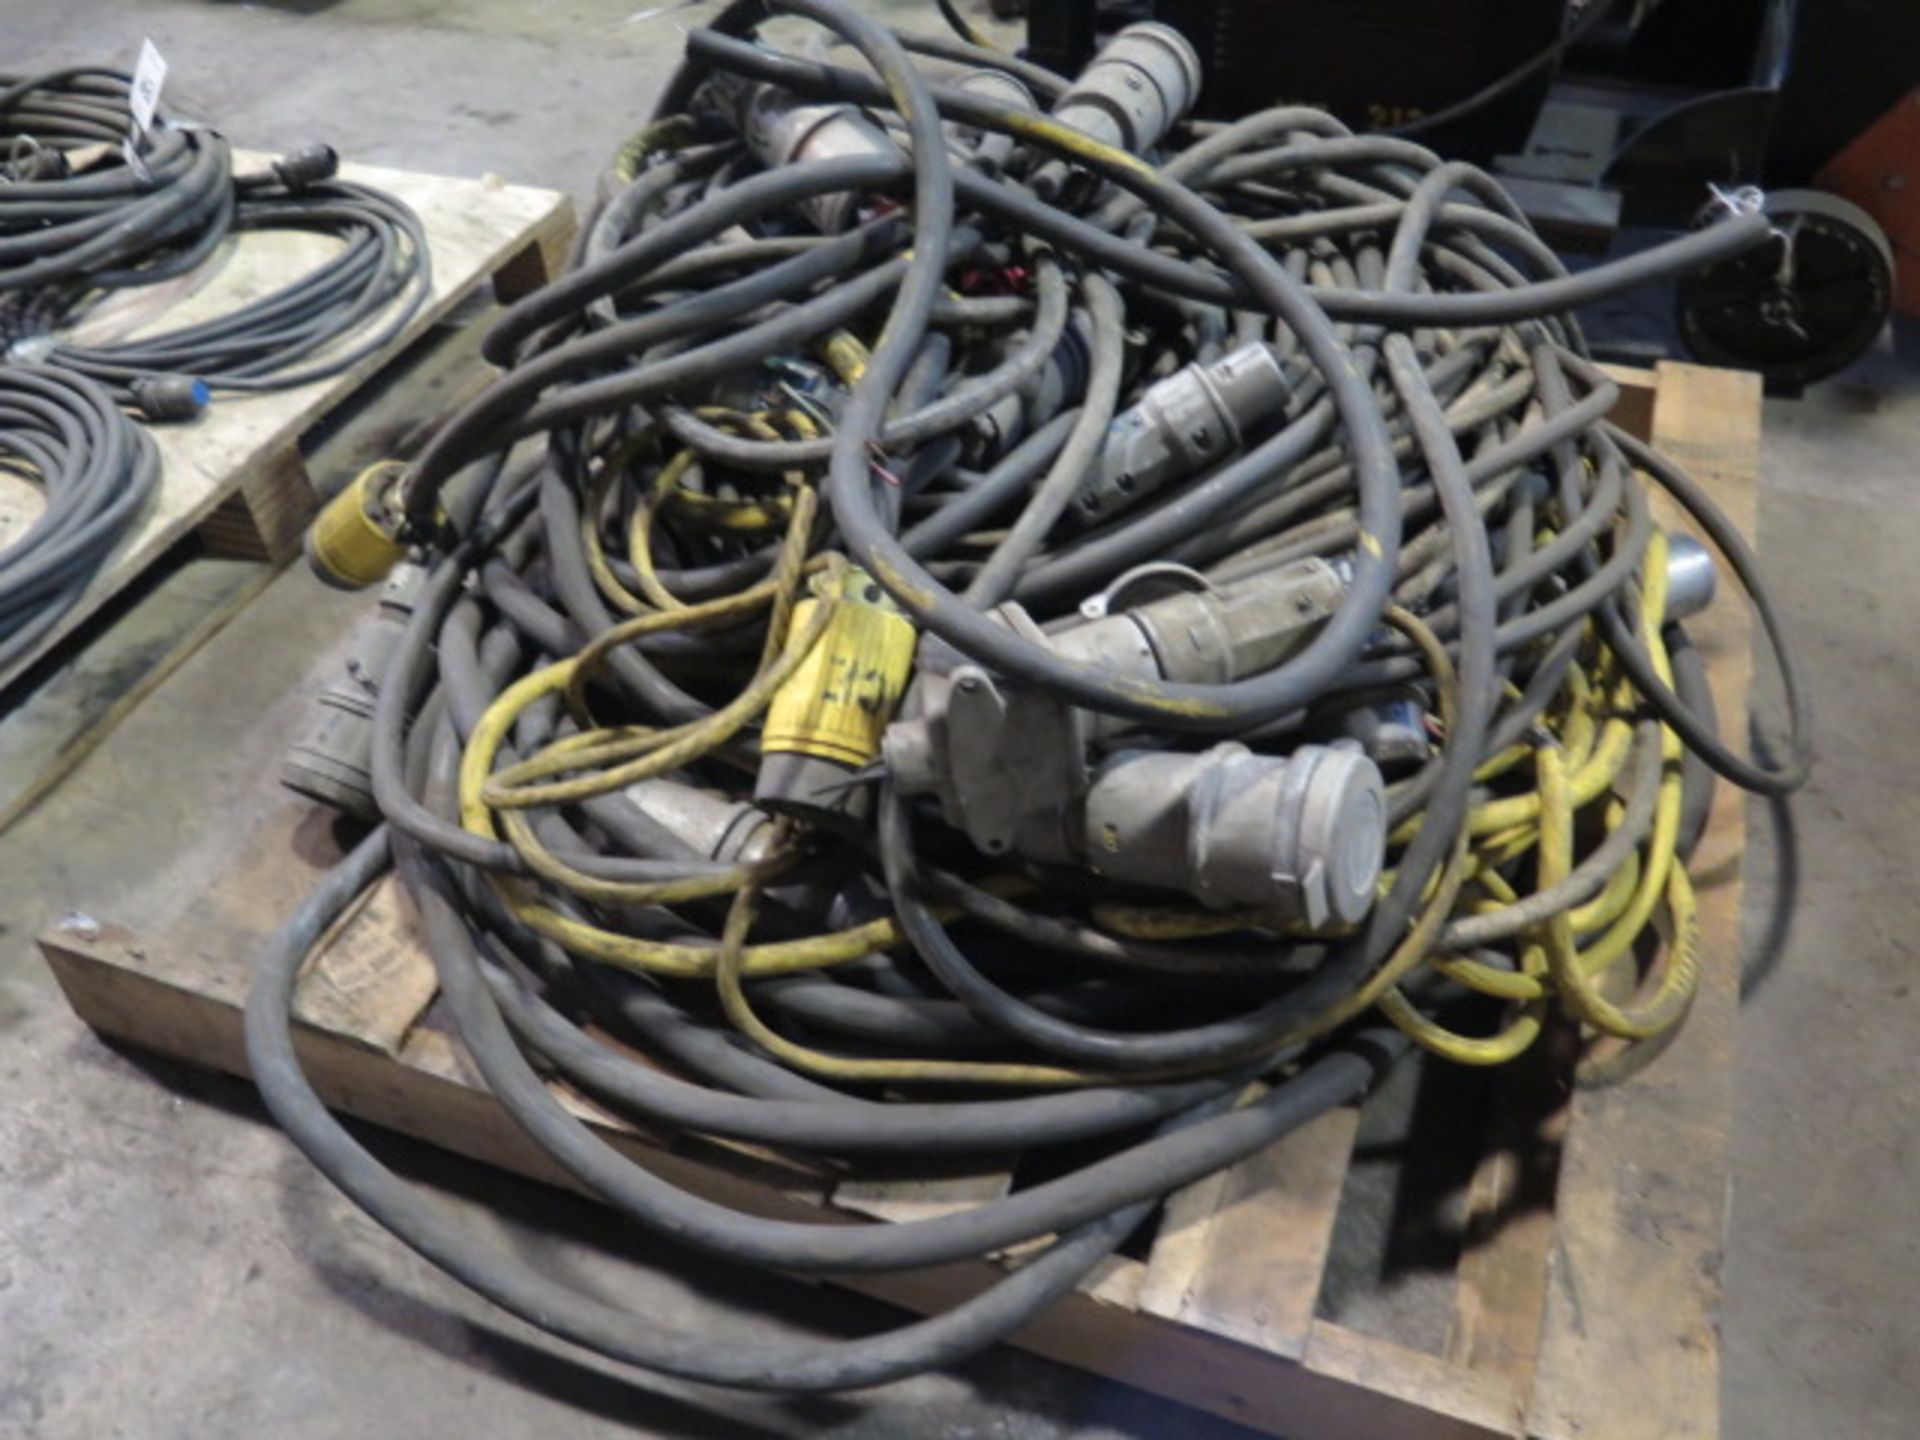 Welding Power Extension Cords (SOLD AS-IS - NO WARRANTY) - Image 2 of 7